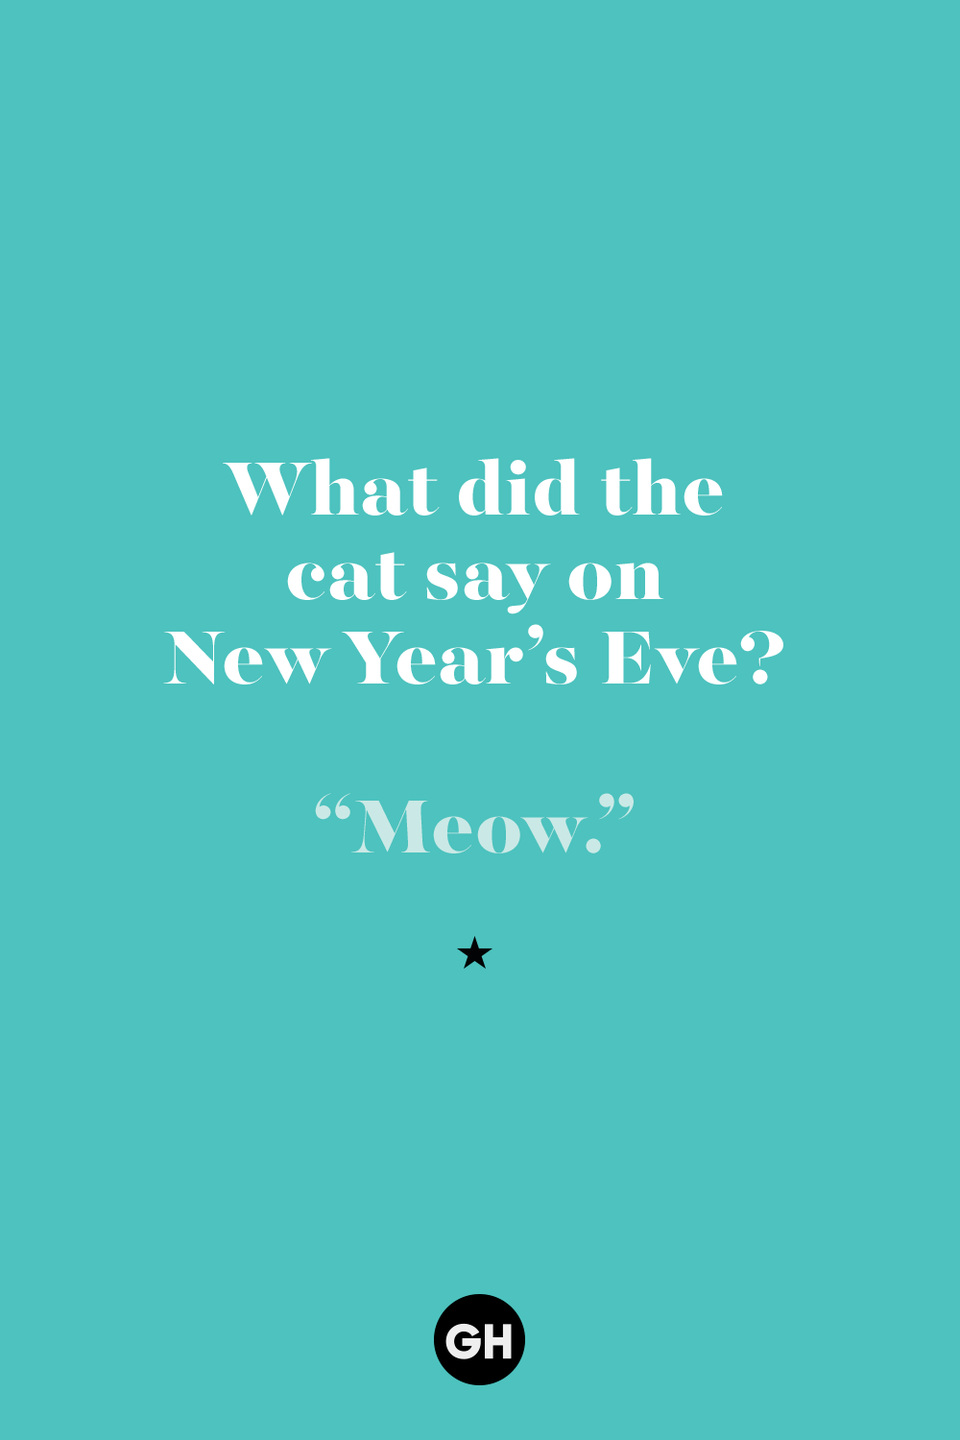 what did the cat say on new year's eve meow